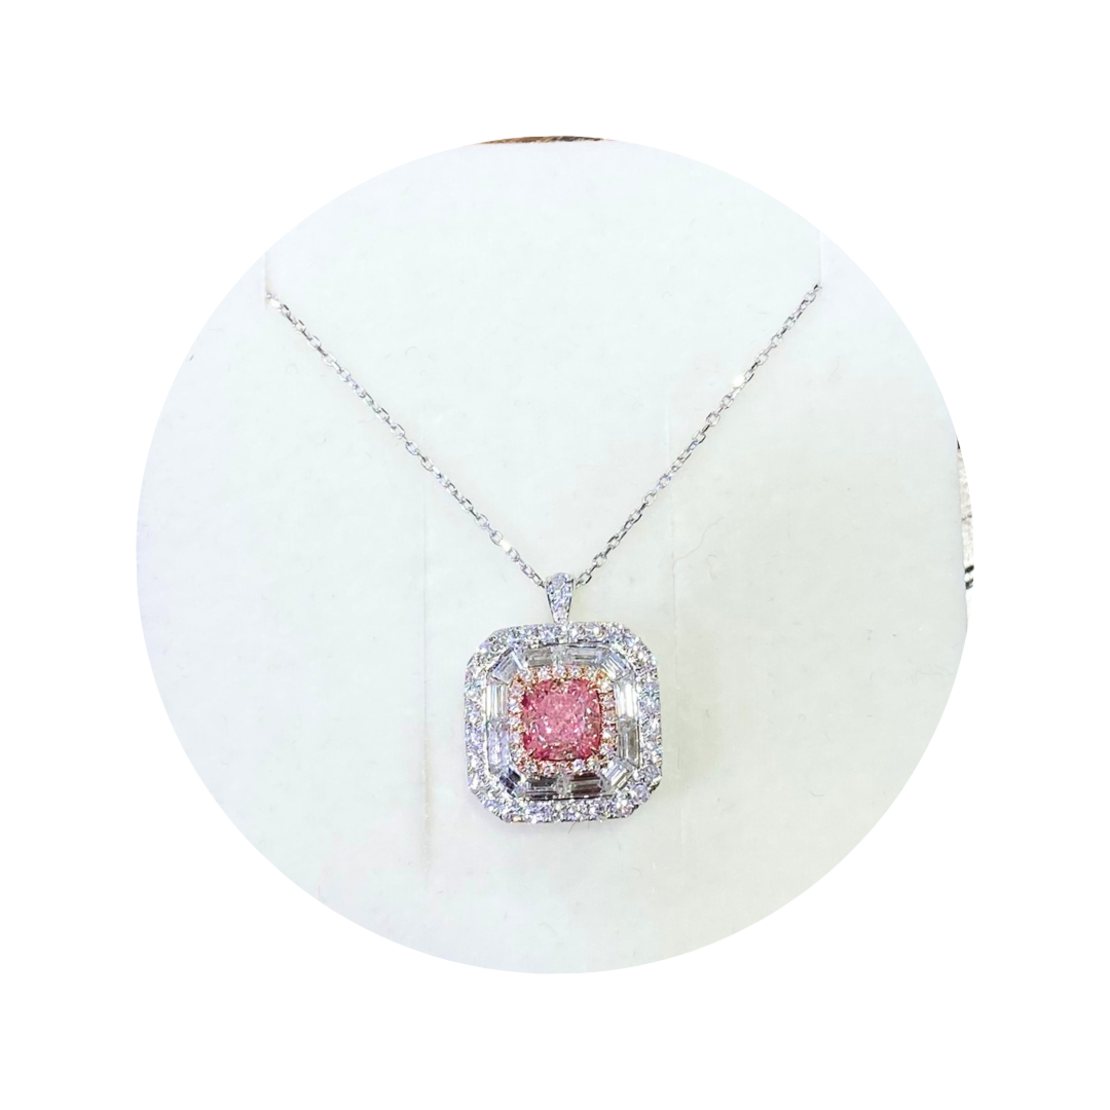 2.37 ct Pink fancy diamond ring and a necklace all in one